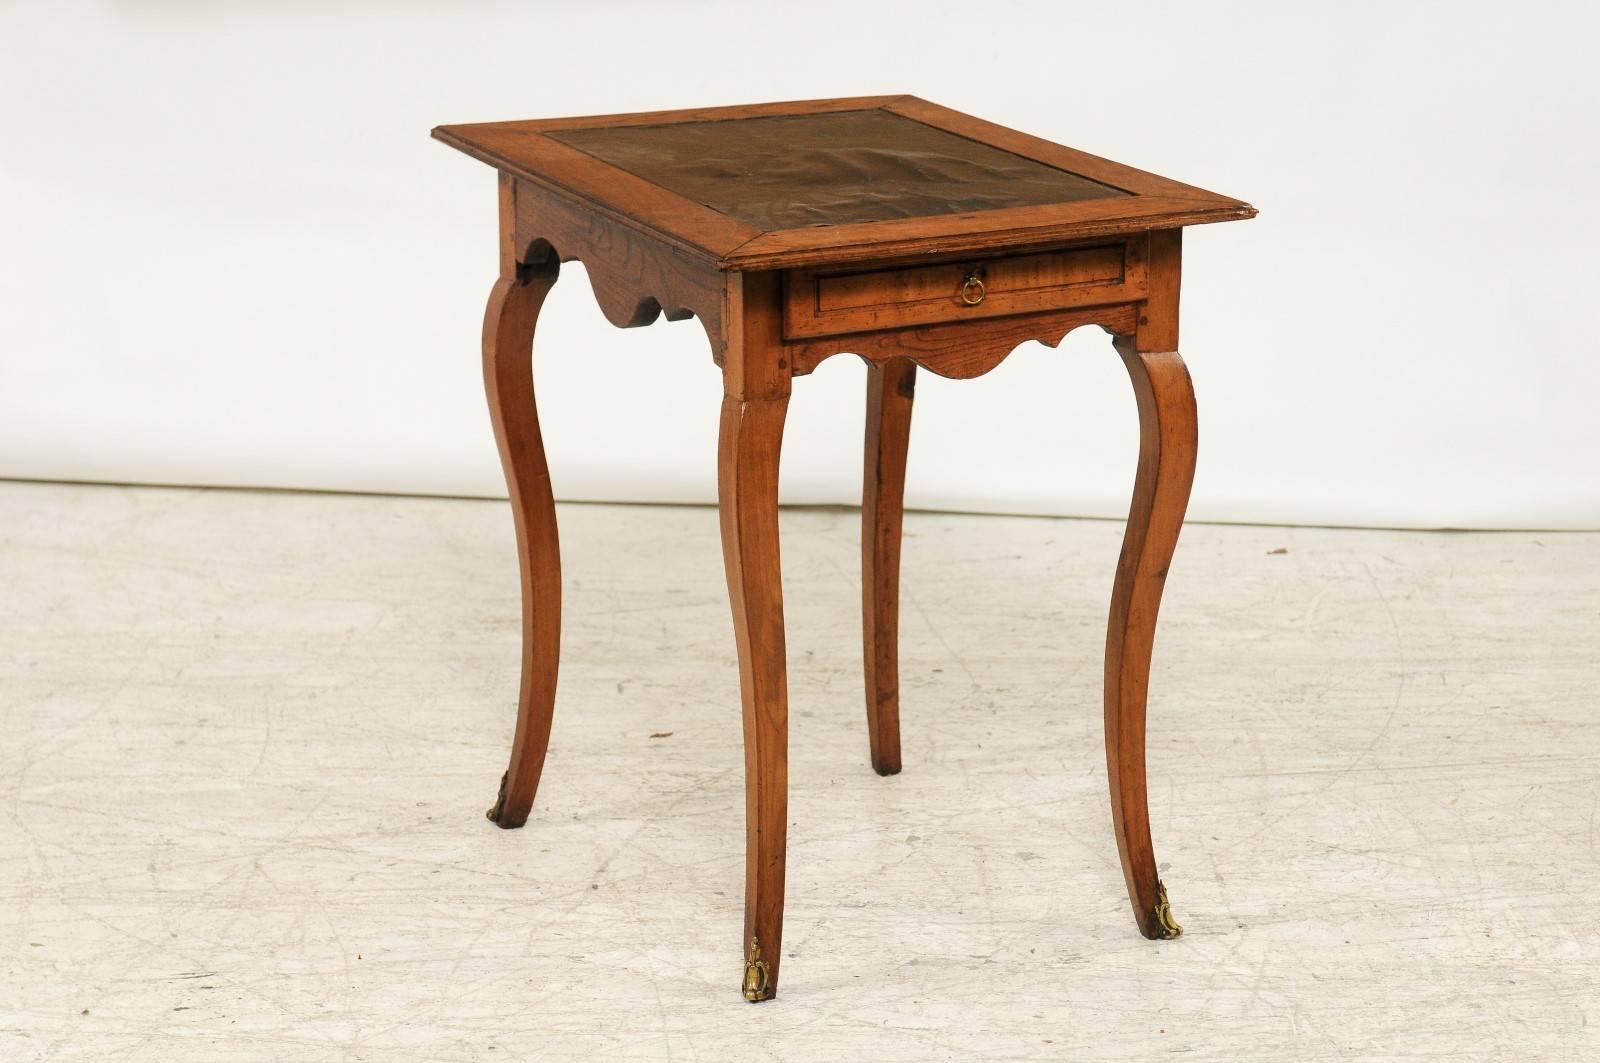 A French embossed leather top Louis XV style side table with single drawer, cabriole legs and ormolu mounts from the second half of the 19th century. This French side table features a rectangular top with inset black leather, showing the traces of